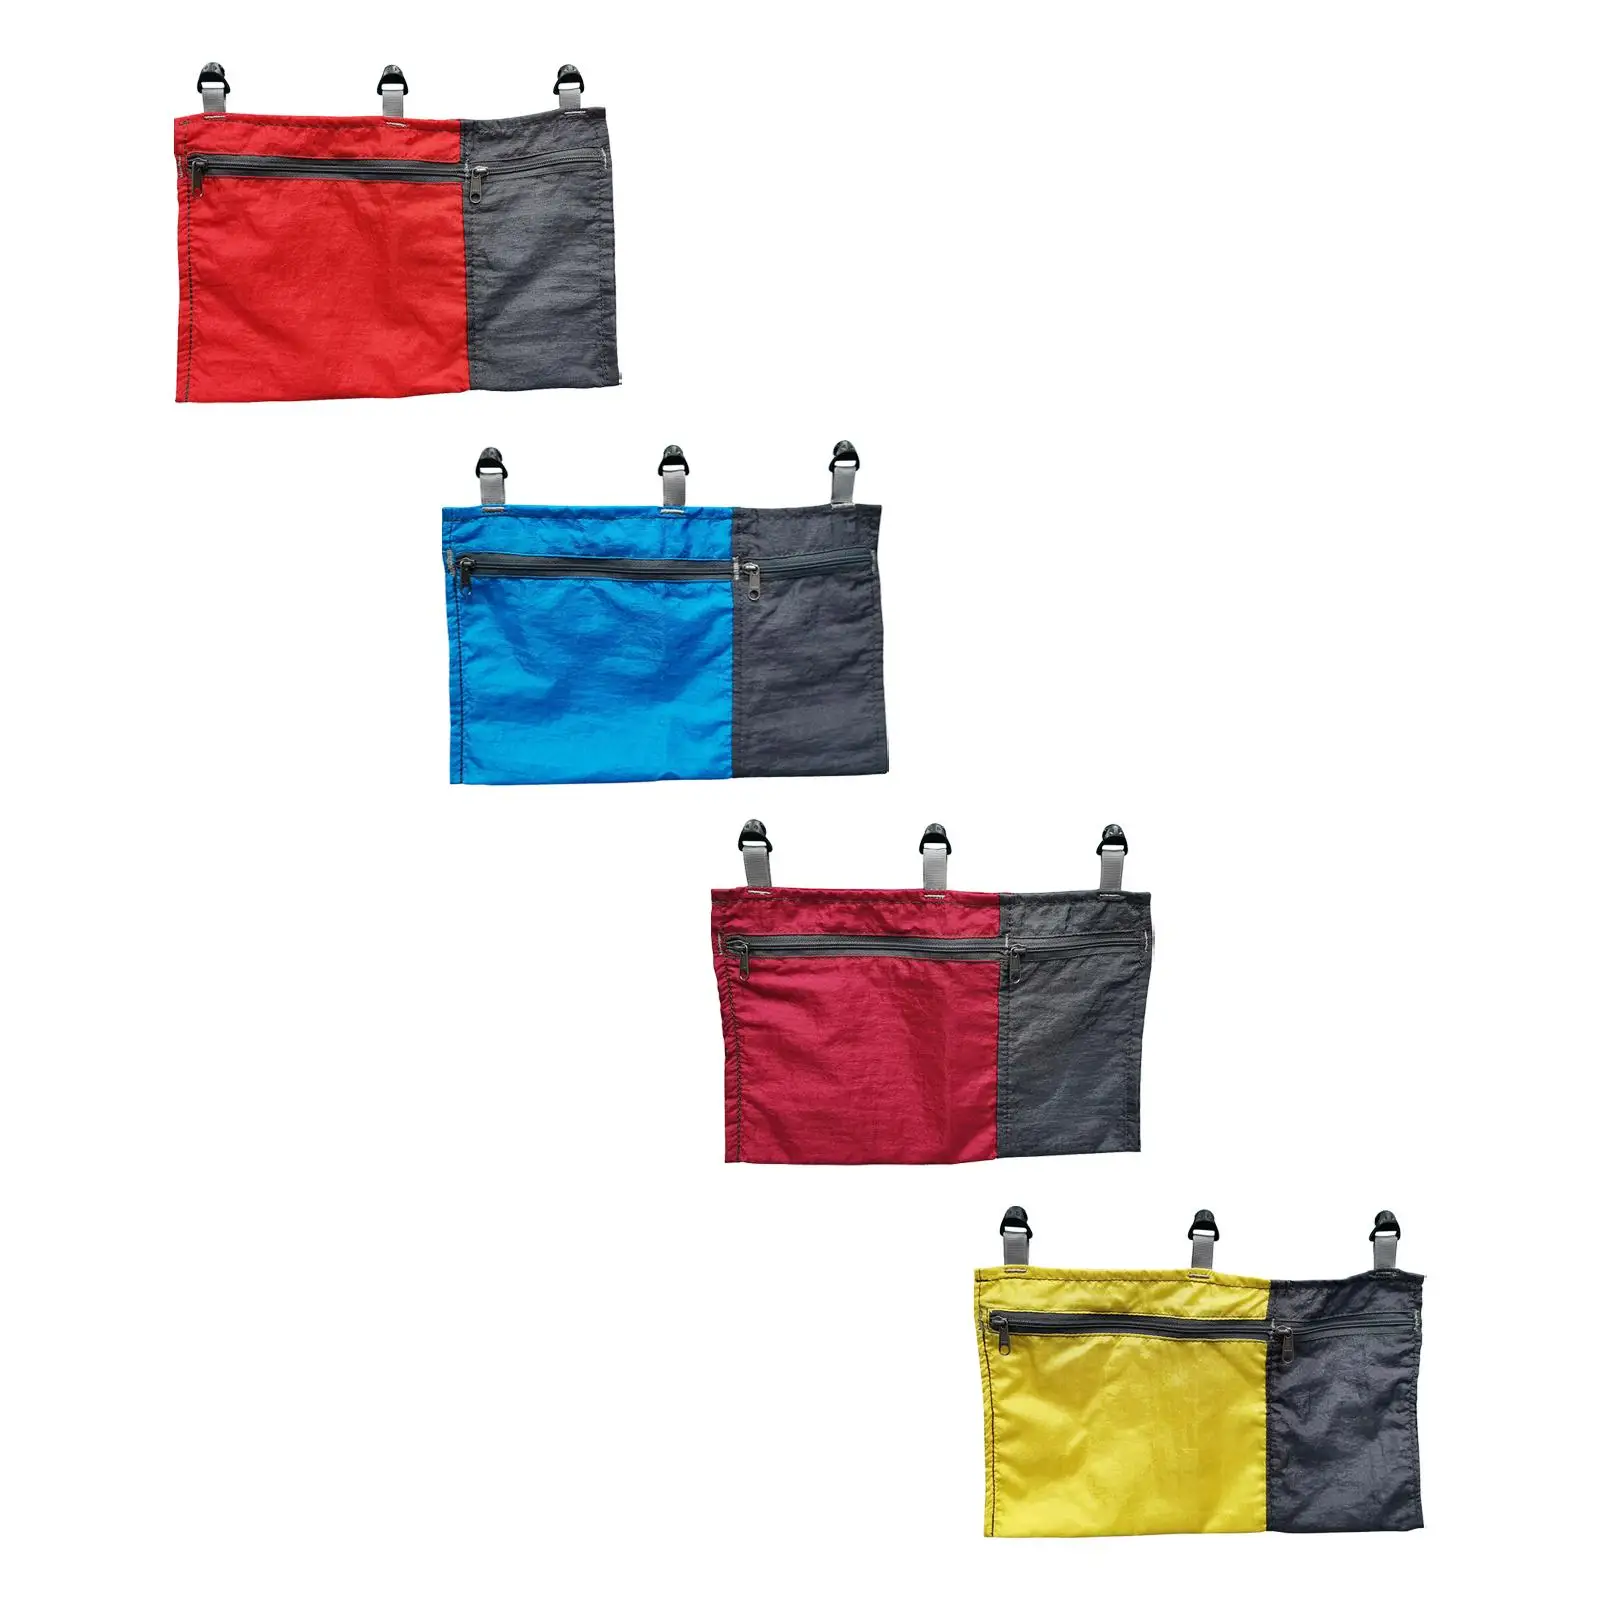 Hammock Organizer Bag Slidable Portable 5 Pockets Storage Container for Camping Outdoor Sports Fishing Climbing Hiking